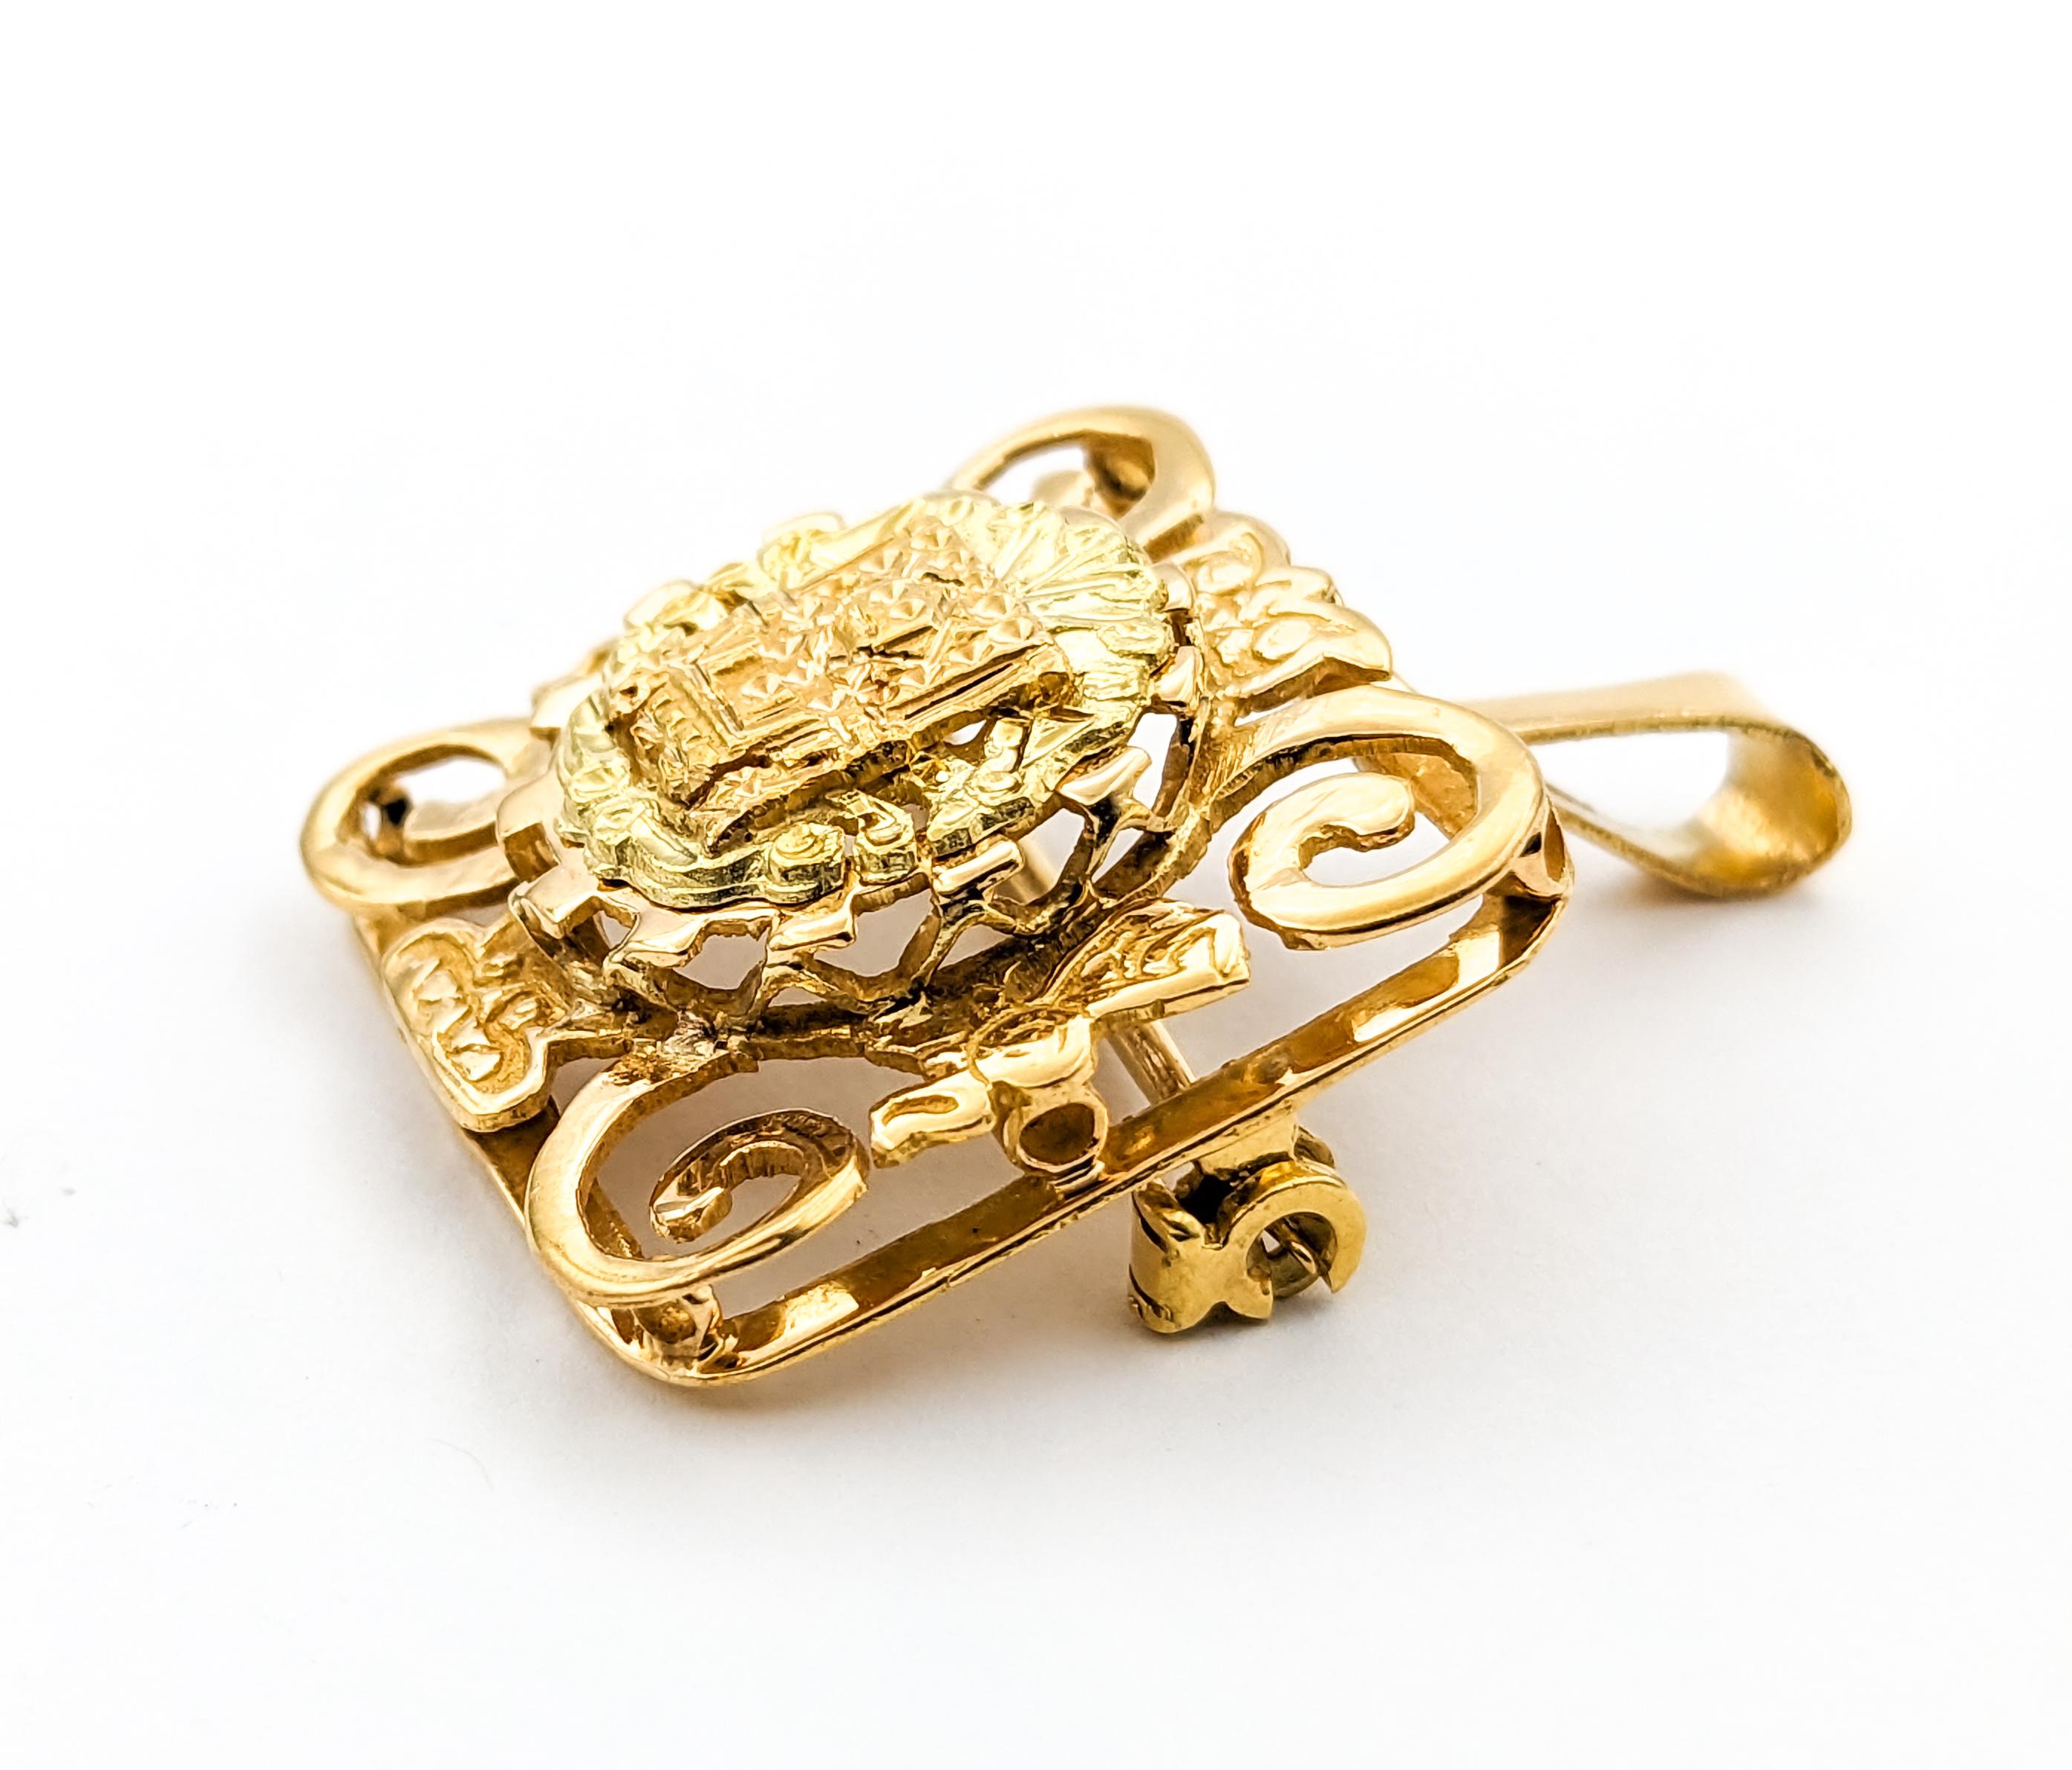 Aztec Ancient God Vintage Brooch/Pendant In Yellow Gold


Unveil the grandeur of ancient civilizations with this magnificent Vintage Brooch/Pendant, exquisitely fashioned in 14kt Yellow Gold. This piece artfully depicts an Aztec Ancient god, a